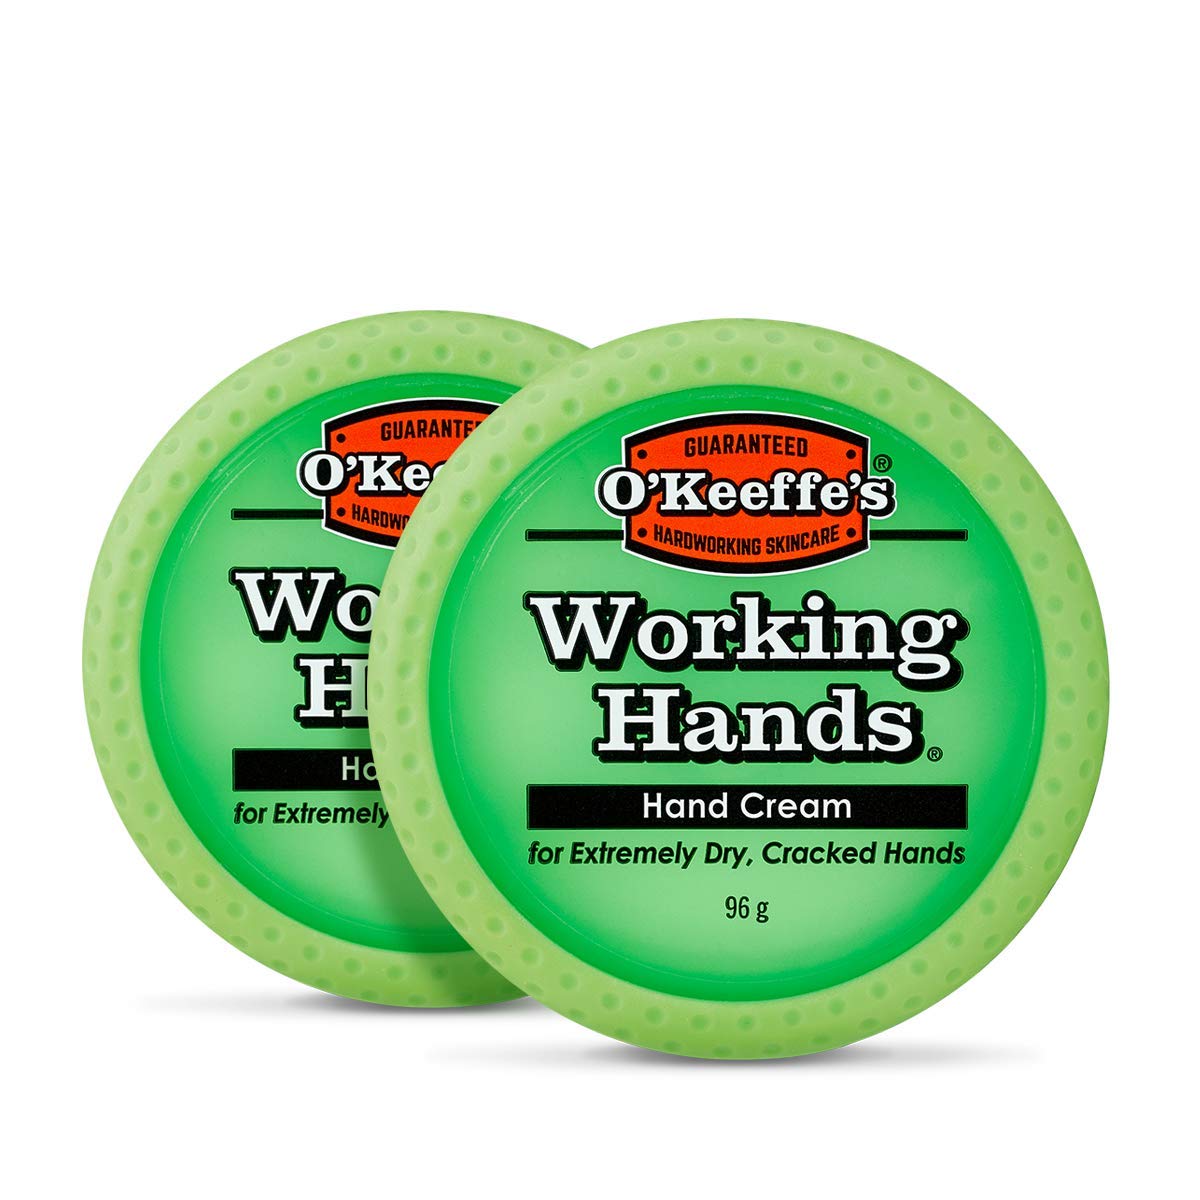 O'Keeffe's Working Hands 96g Jar (Pack of 2)